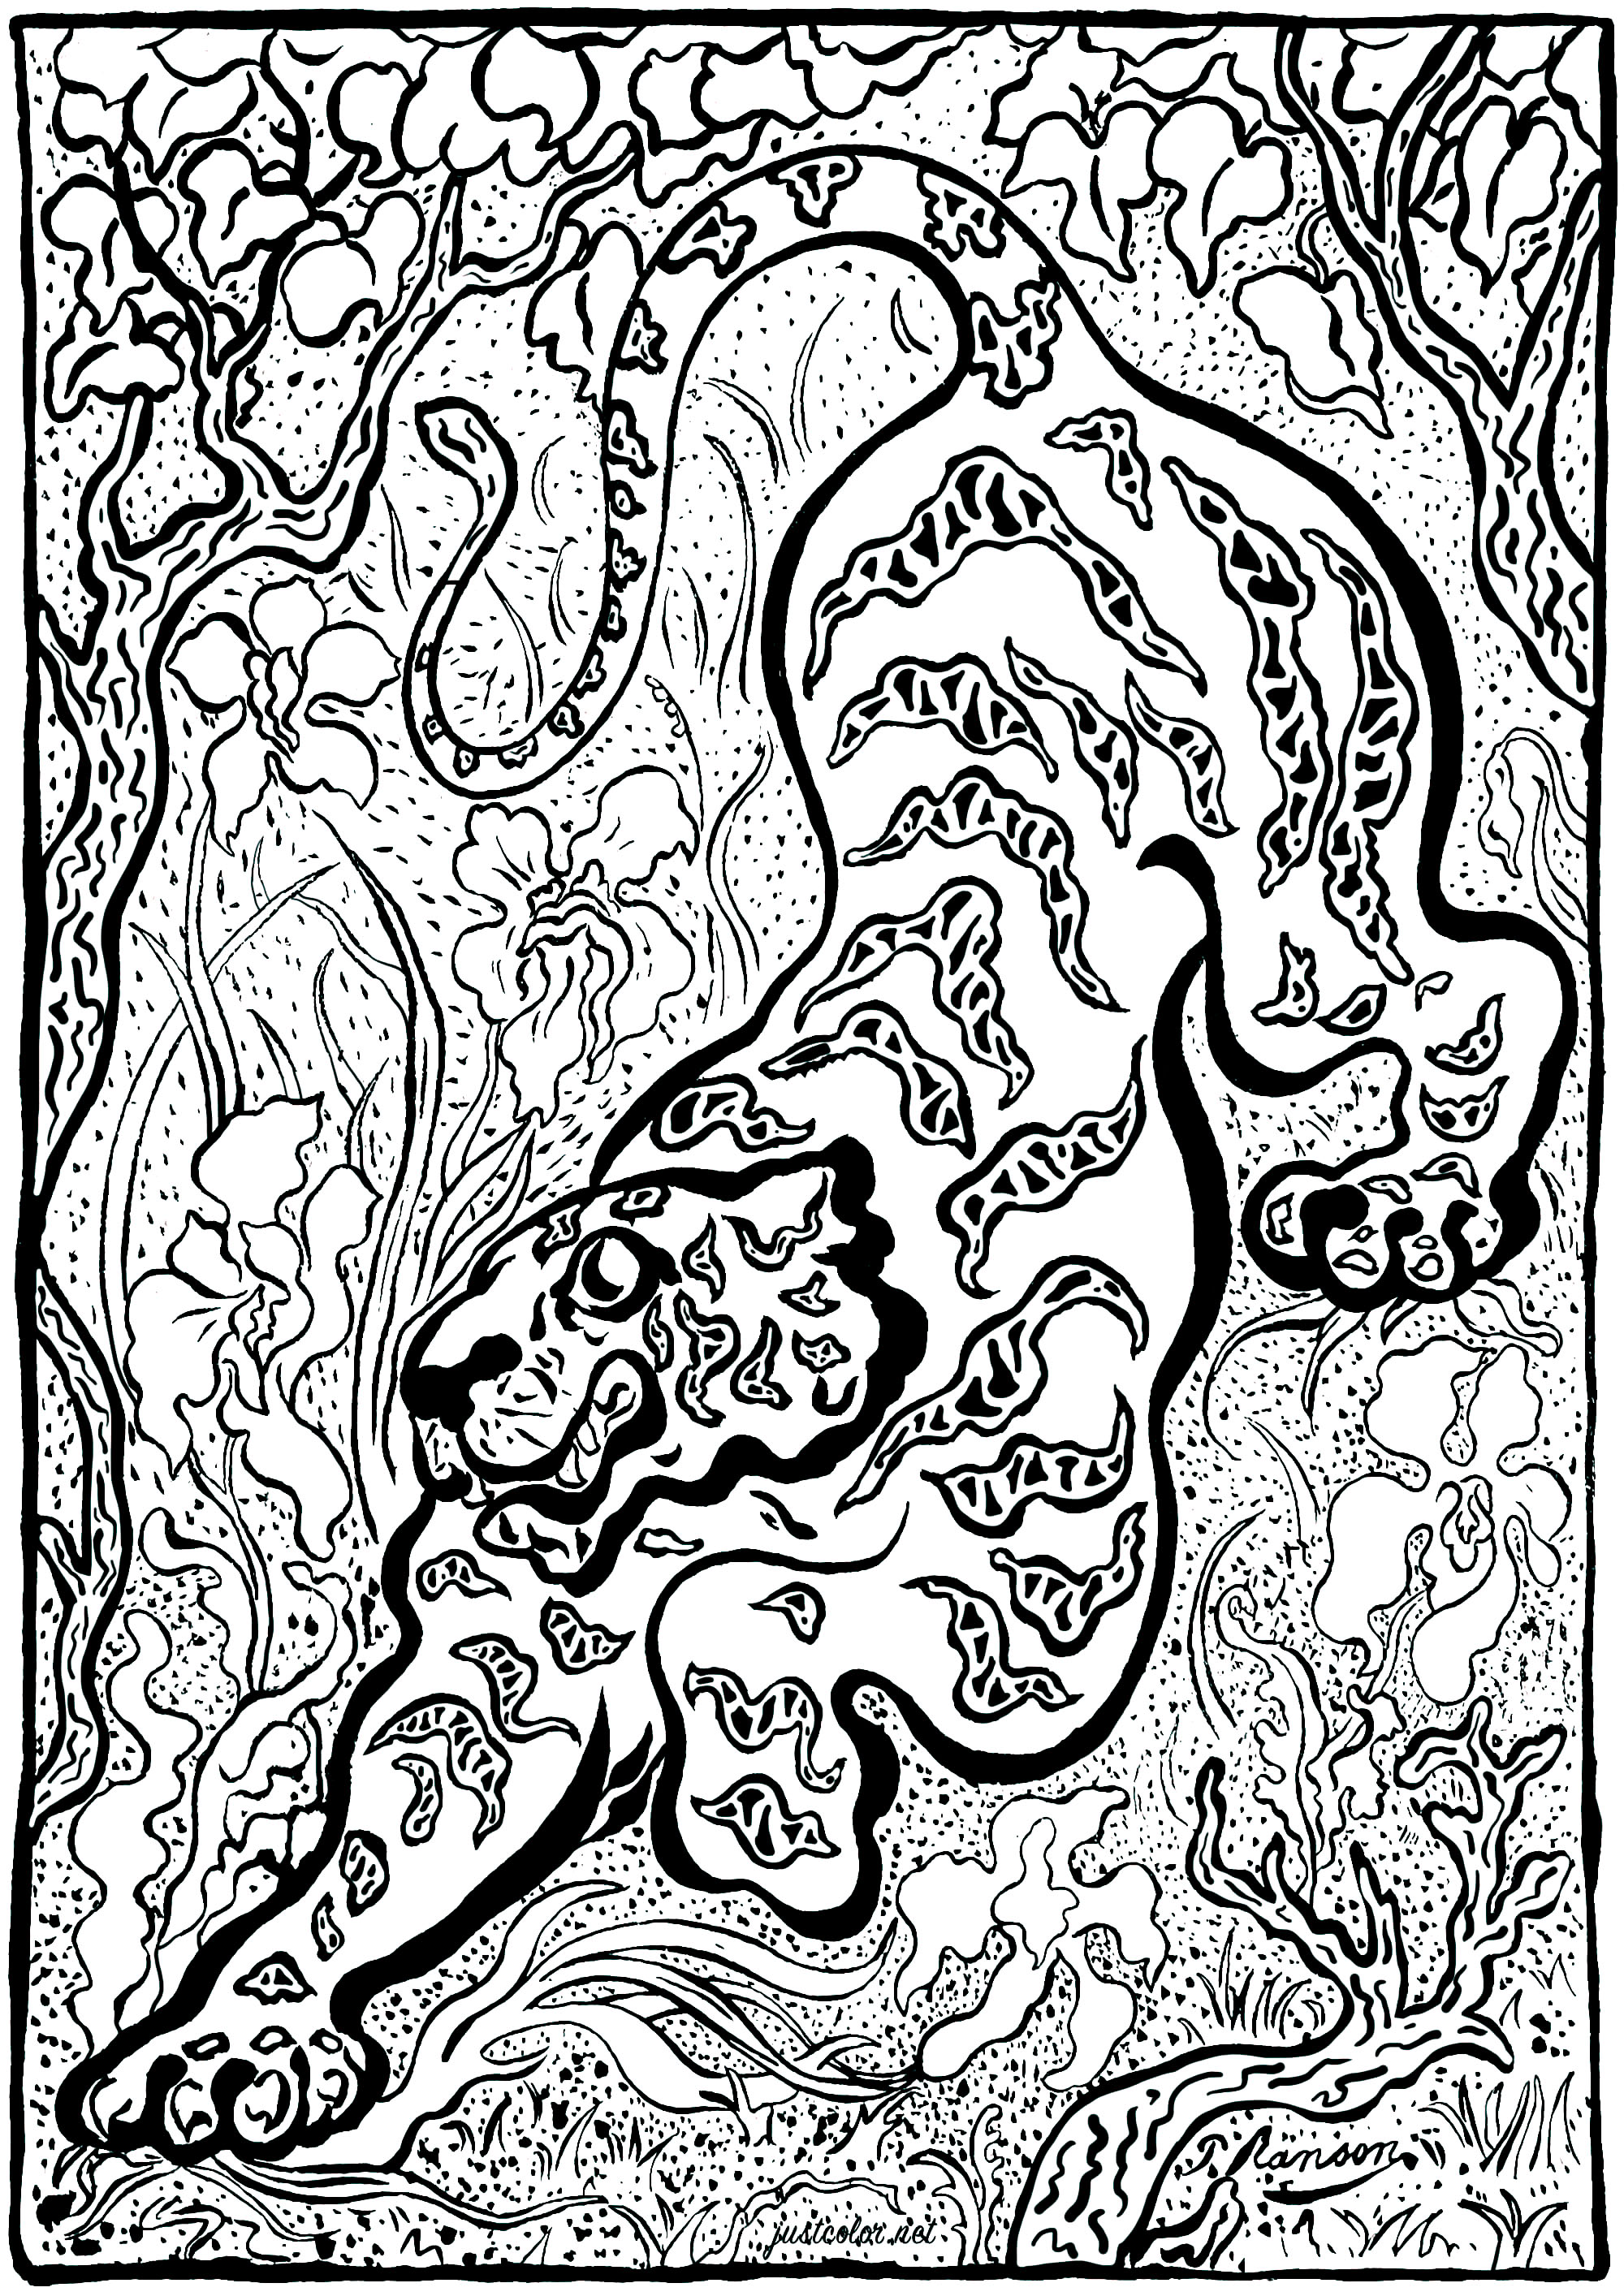 Coloring based on 'Tigre dans les jungles' by Paul-Élie Ranson (1883) - Version 2 (complex). Paul-Élie Ranson, a member of the Nabis group, developed an original style with symbolist and esoteric resonances.Inscribed in the history of post-impressionism but at odds with impressionism, the Nabi movement advocates a return to the imaginary and subjectivity.